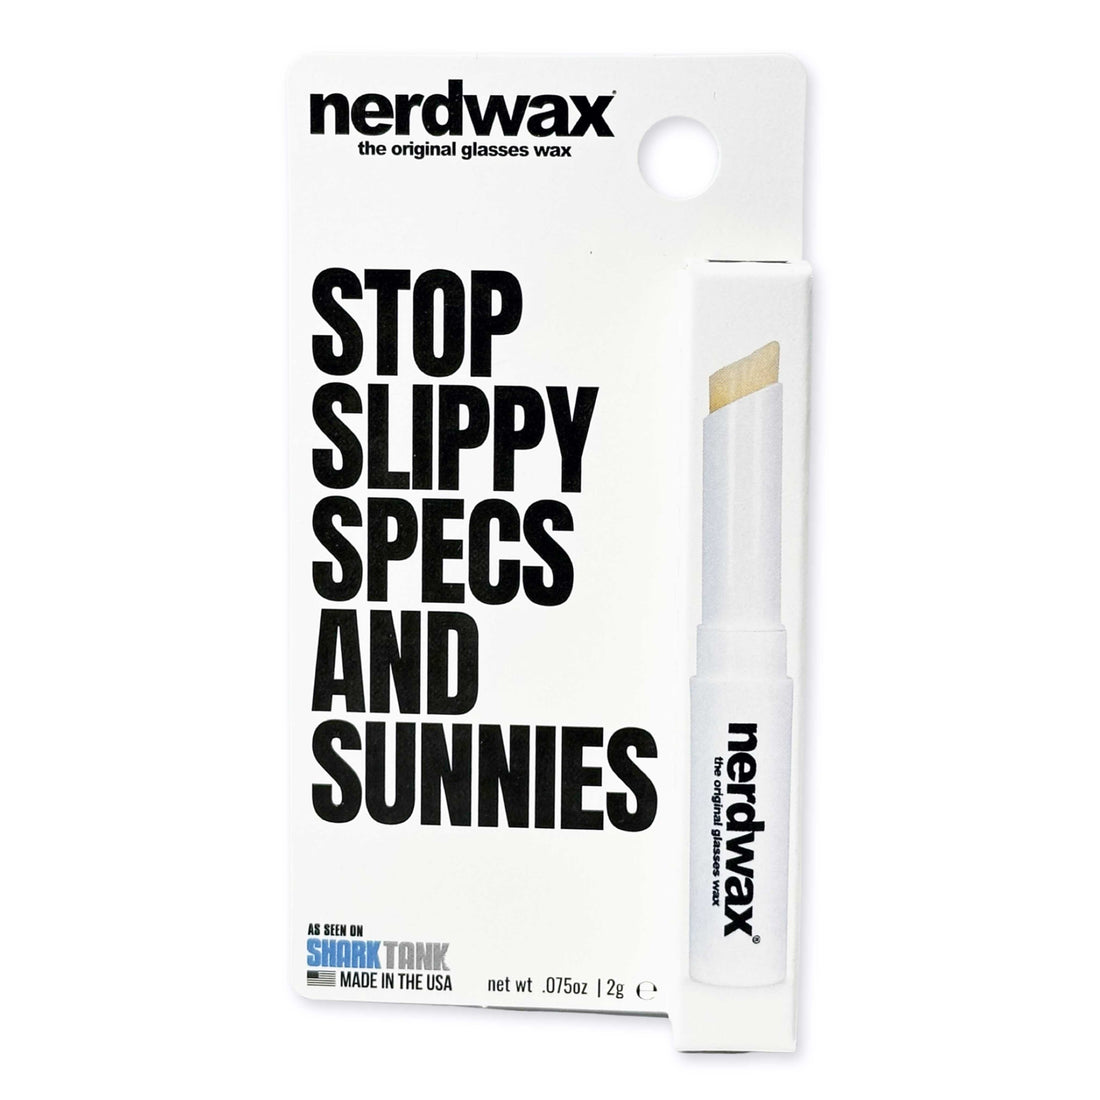 Nerdwax Stops Your Glasses From Slippin' Down Your Face!